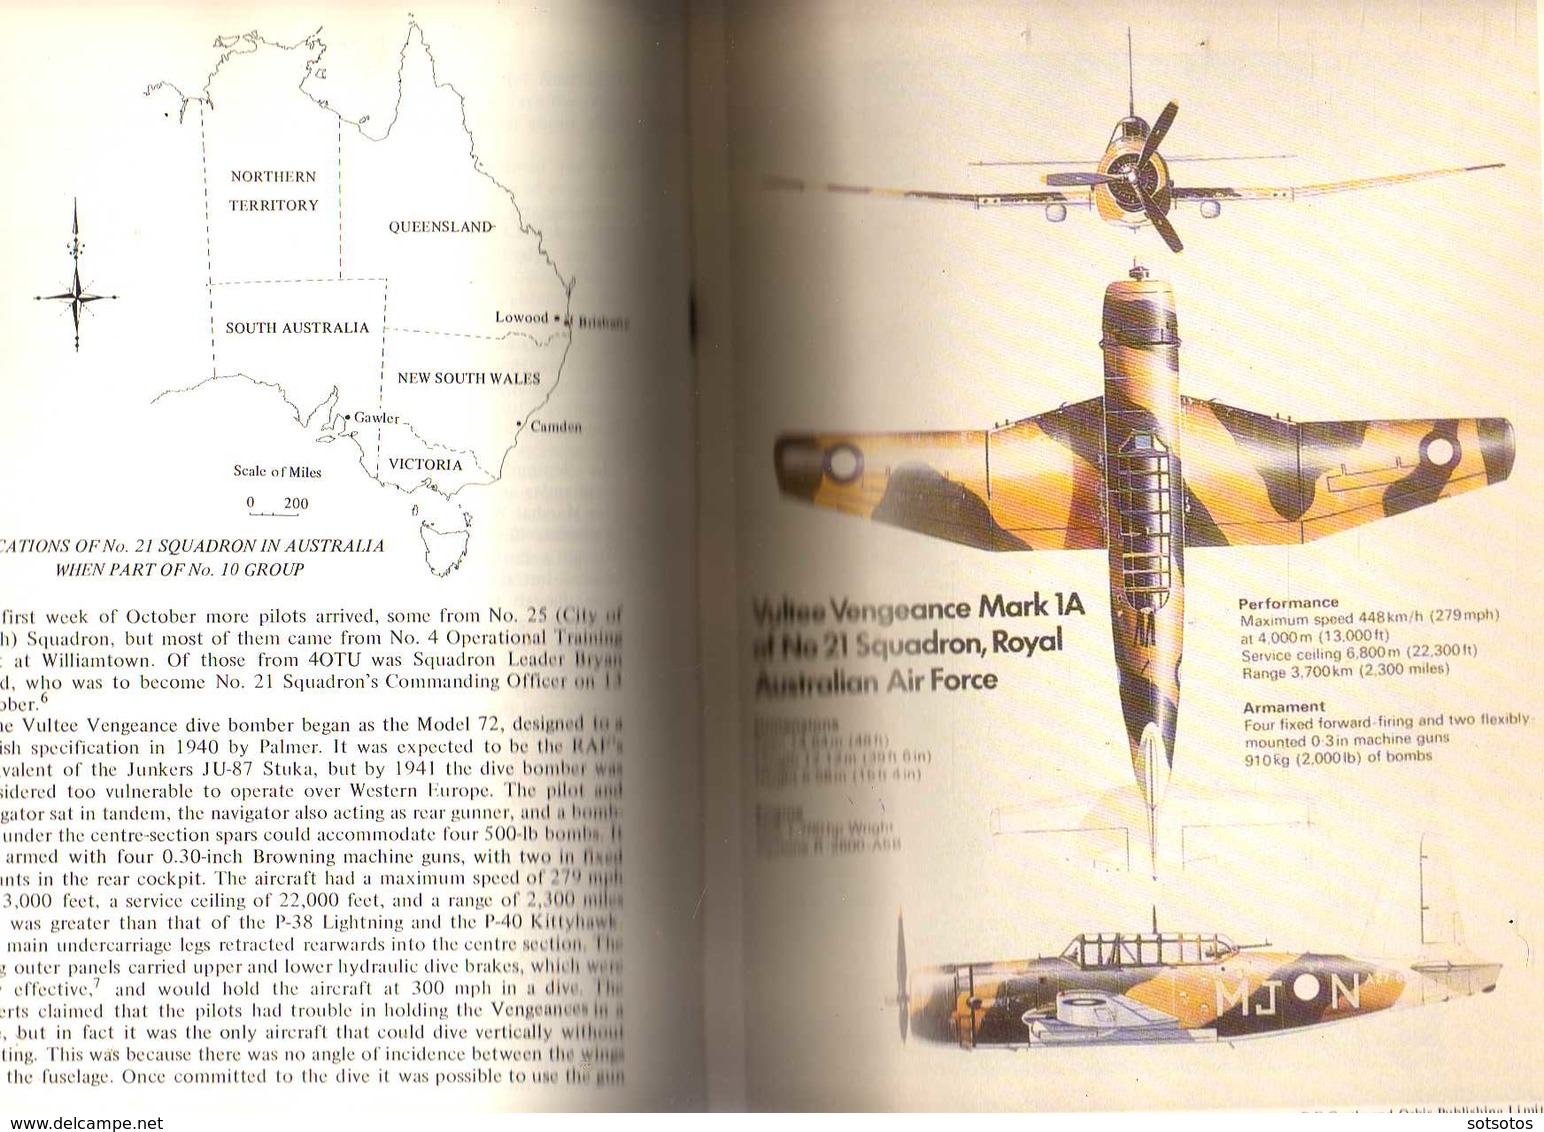 DEMON to VAMPIRE: the STORY of No 21 (City of Melbourne) SQUADRON, Squadron Leader W.H.Brook RAAFAR - 344 pgs – many pho